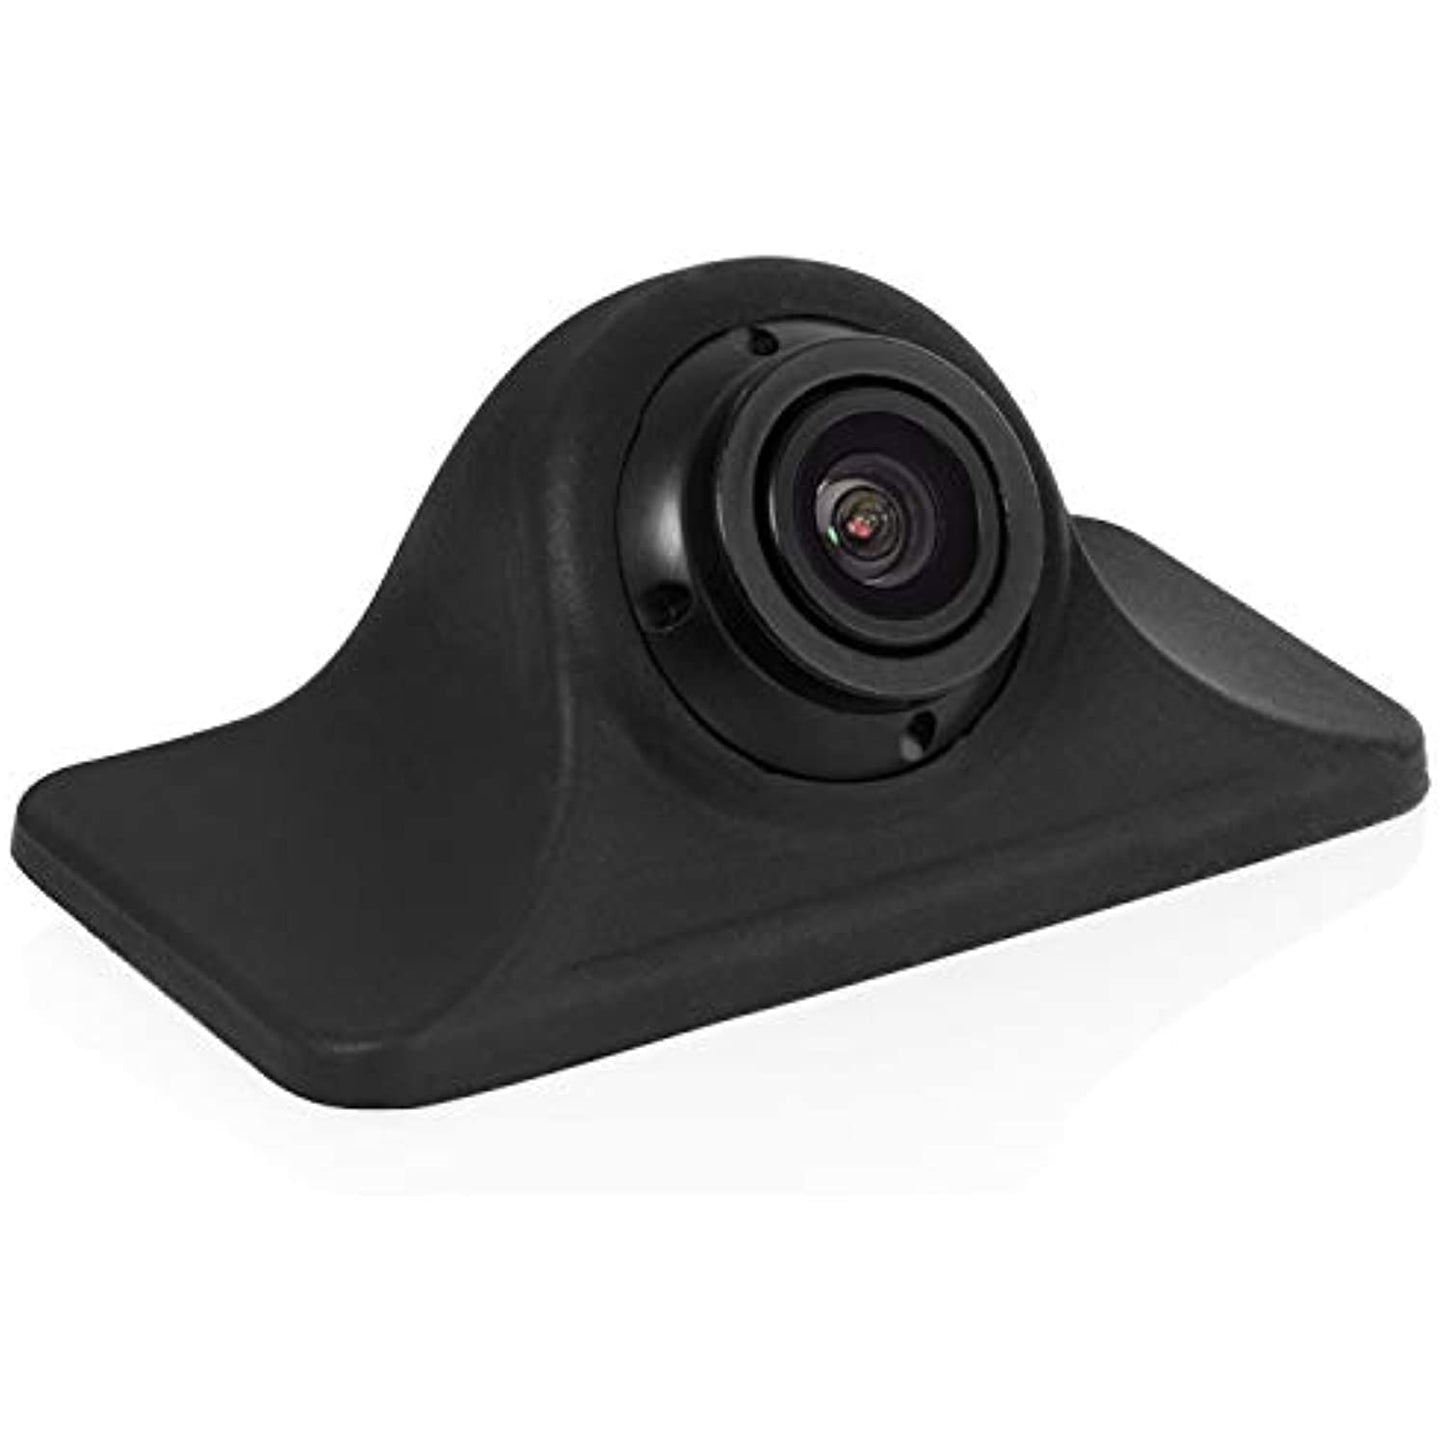 BOYO VISION BOYO VTK501HD - Universal HD Backup Camera with Multiple Mounting Options (6-in-1 Camera System)